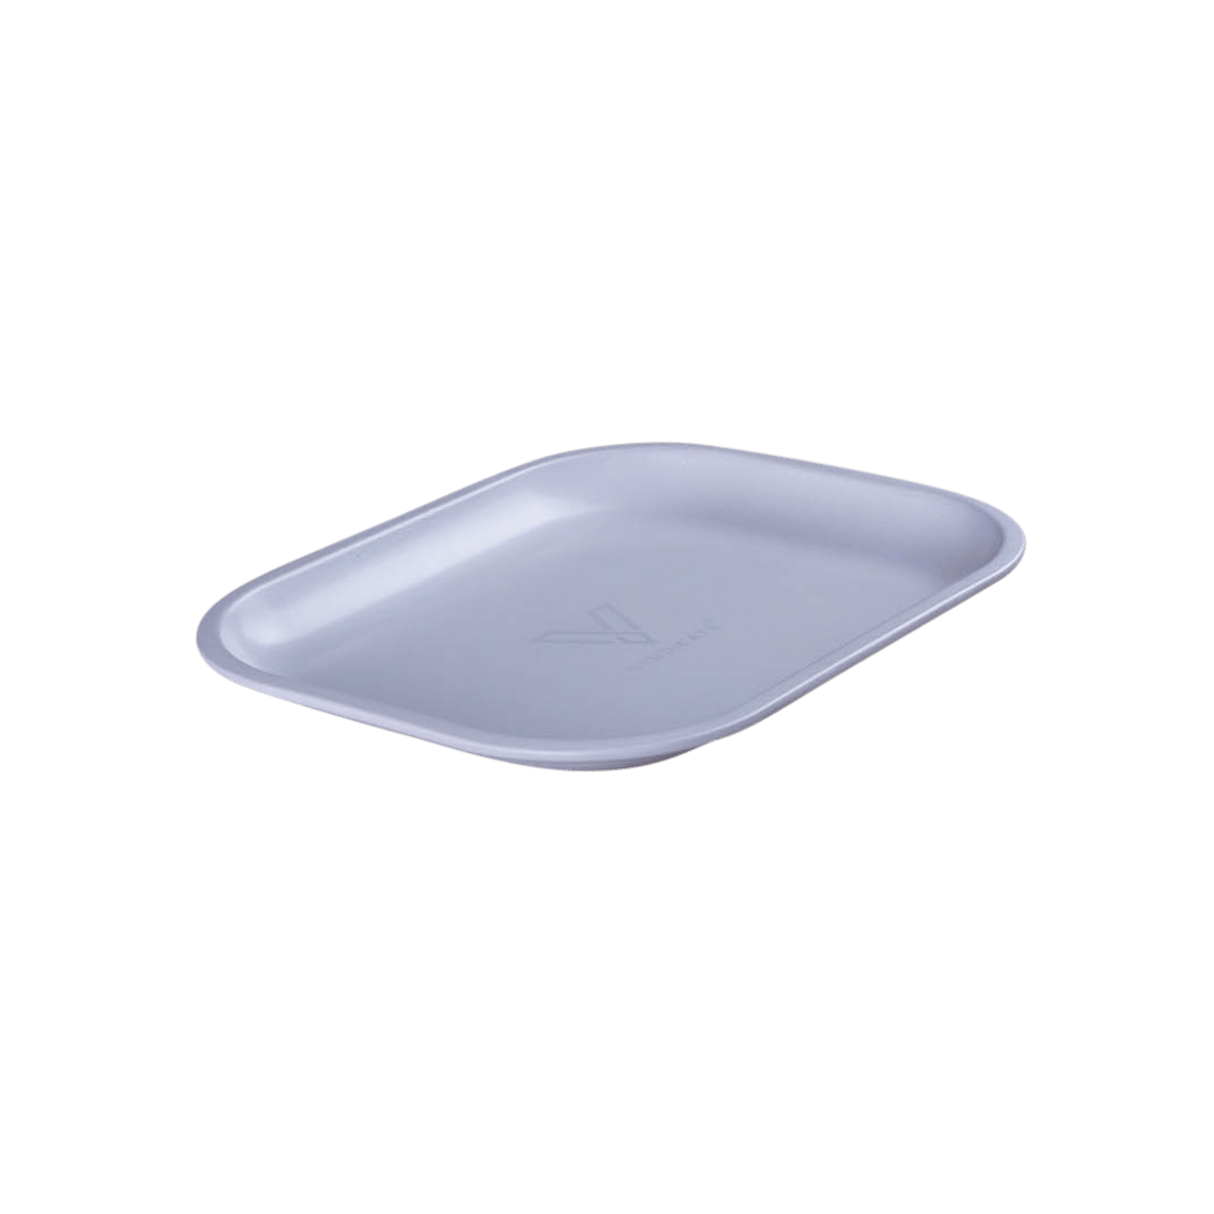 V Syndicate V Class White Metal Rollin' Tray, Compact Design, Top View